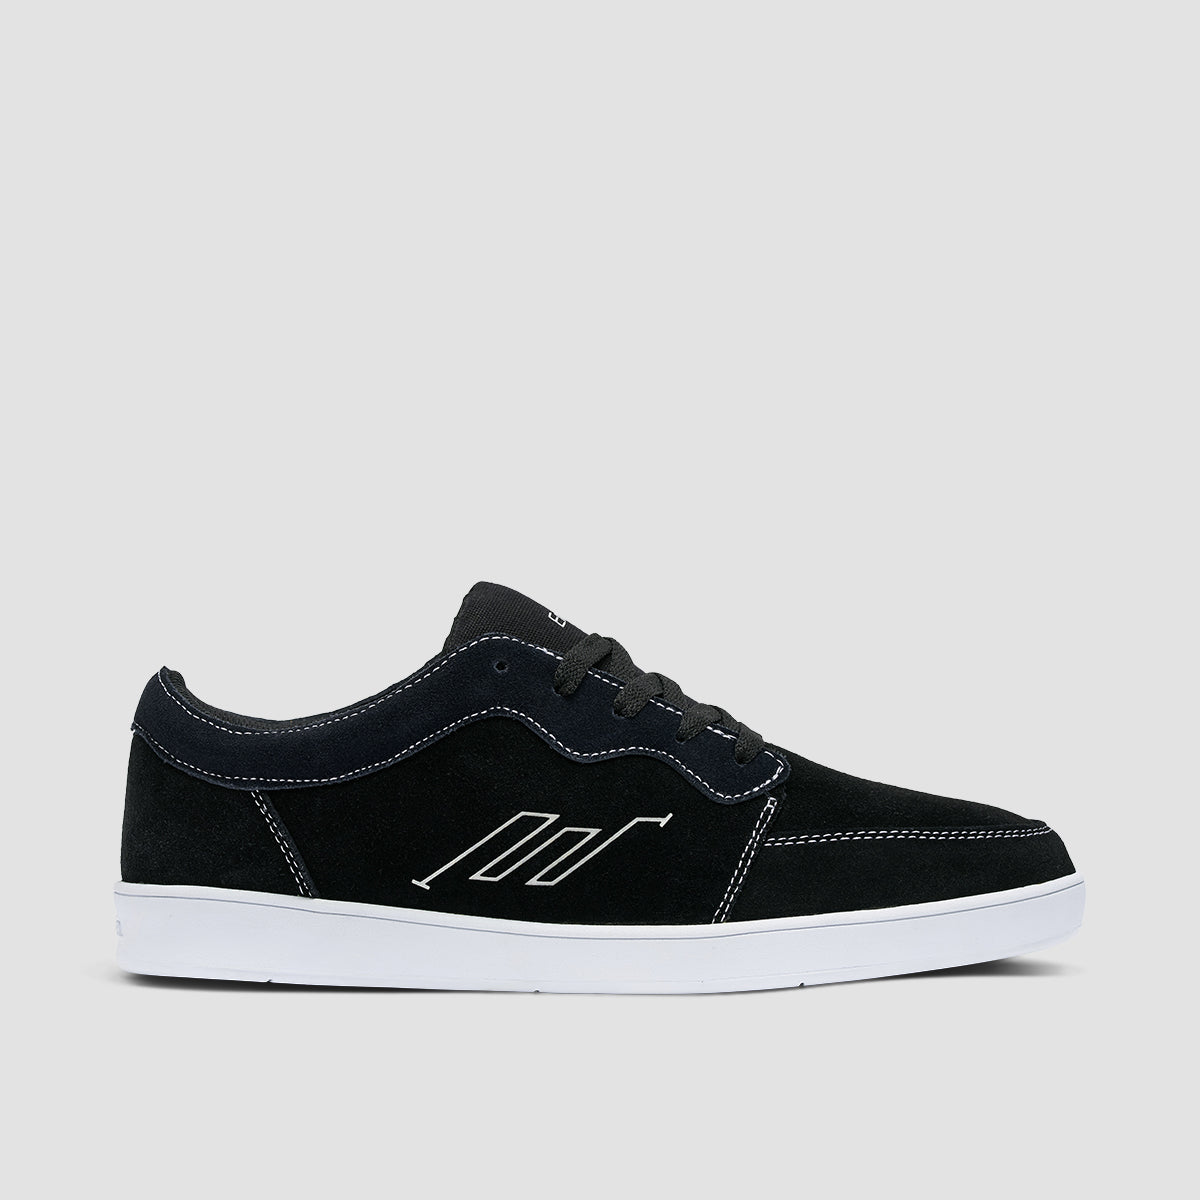 Emerica Quentin G6 Shoes Black/Navy